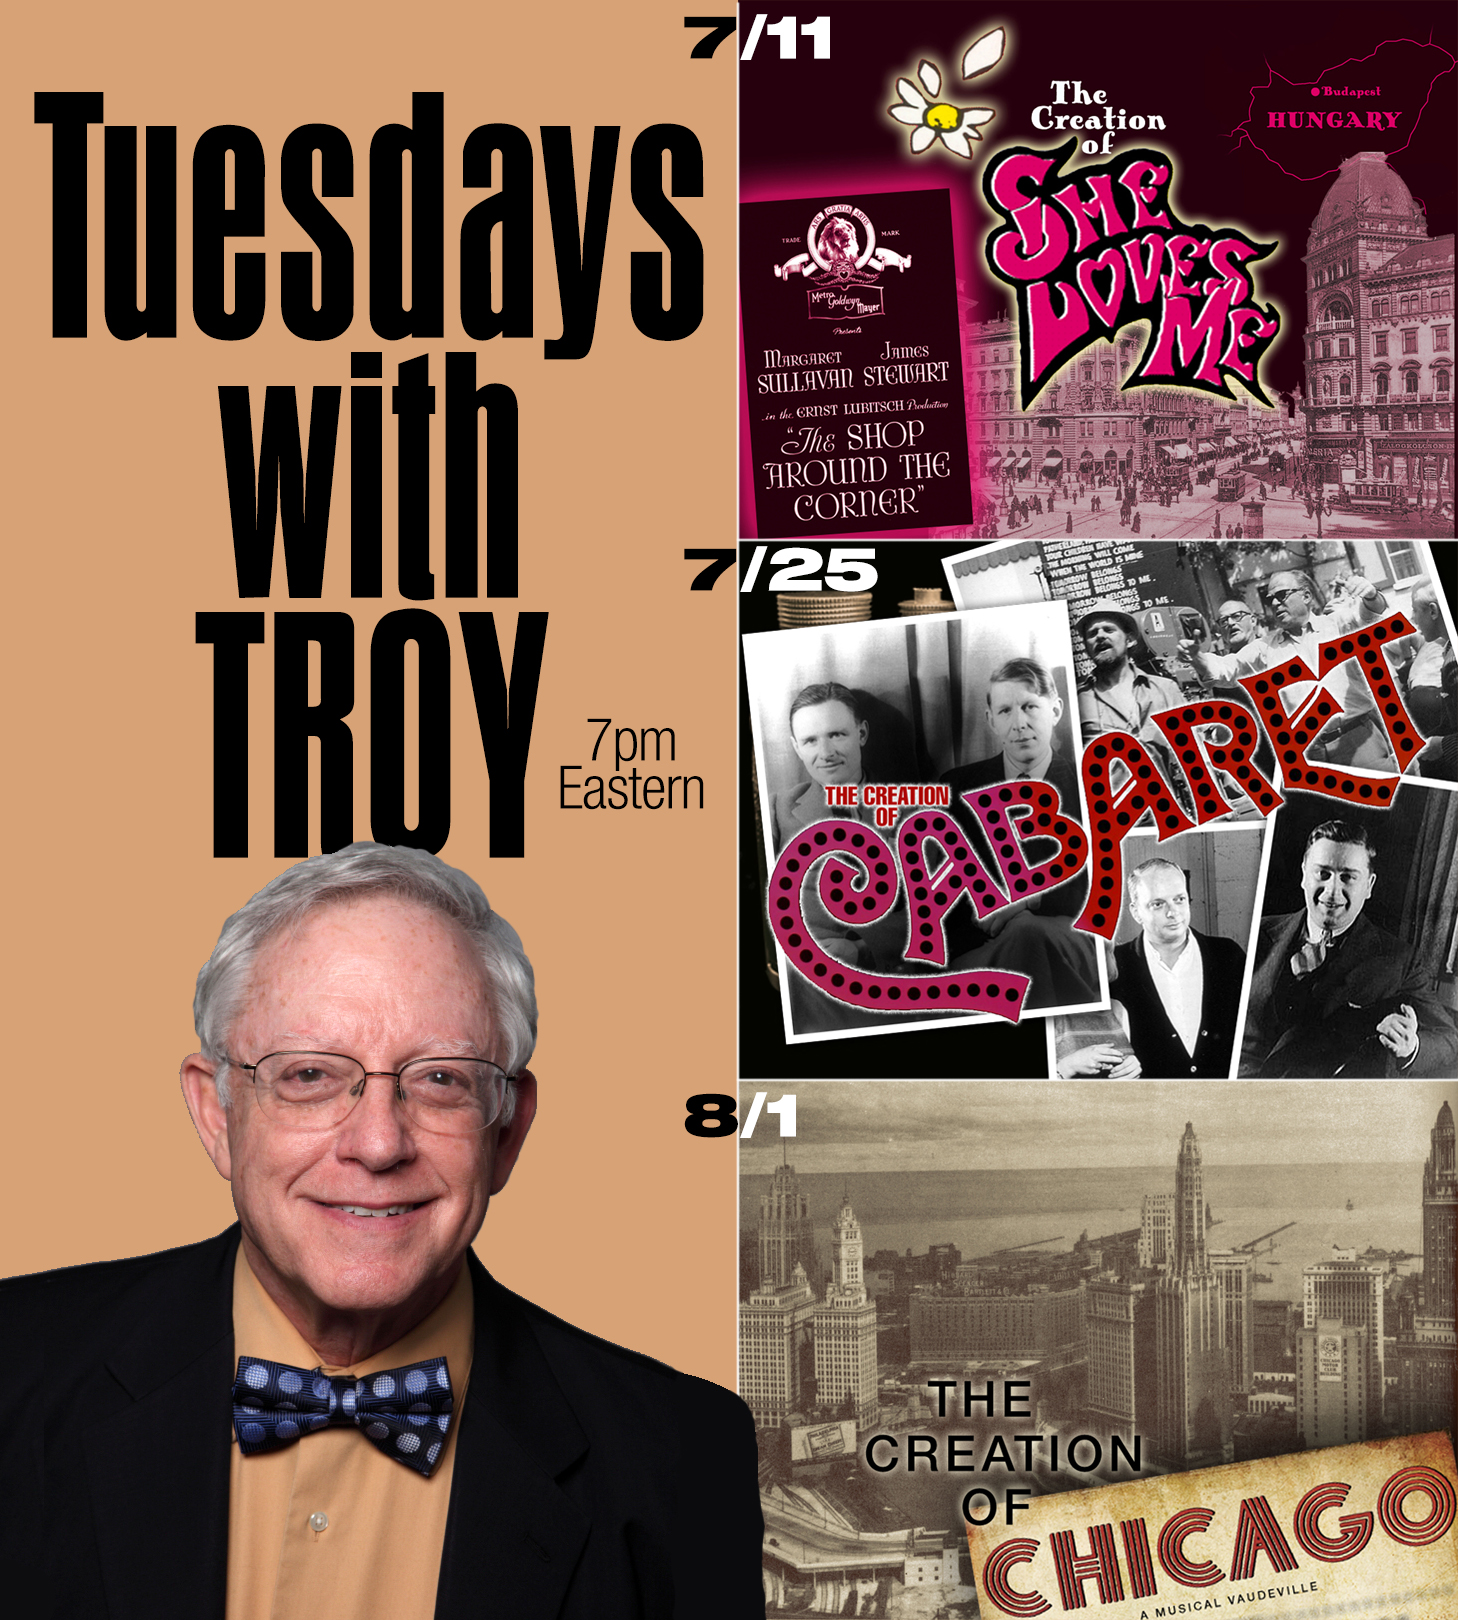 Tuesdays with Troy returns to the York Theatre in Summer 2023!